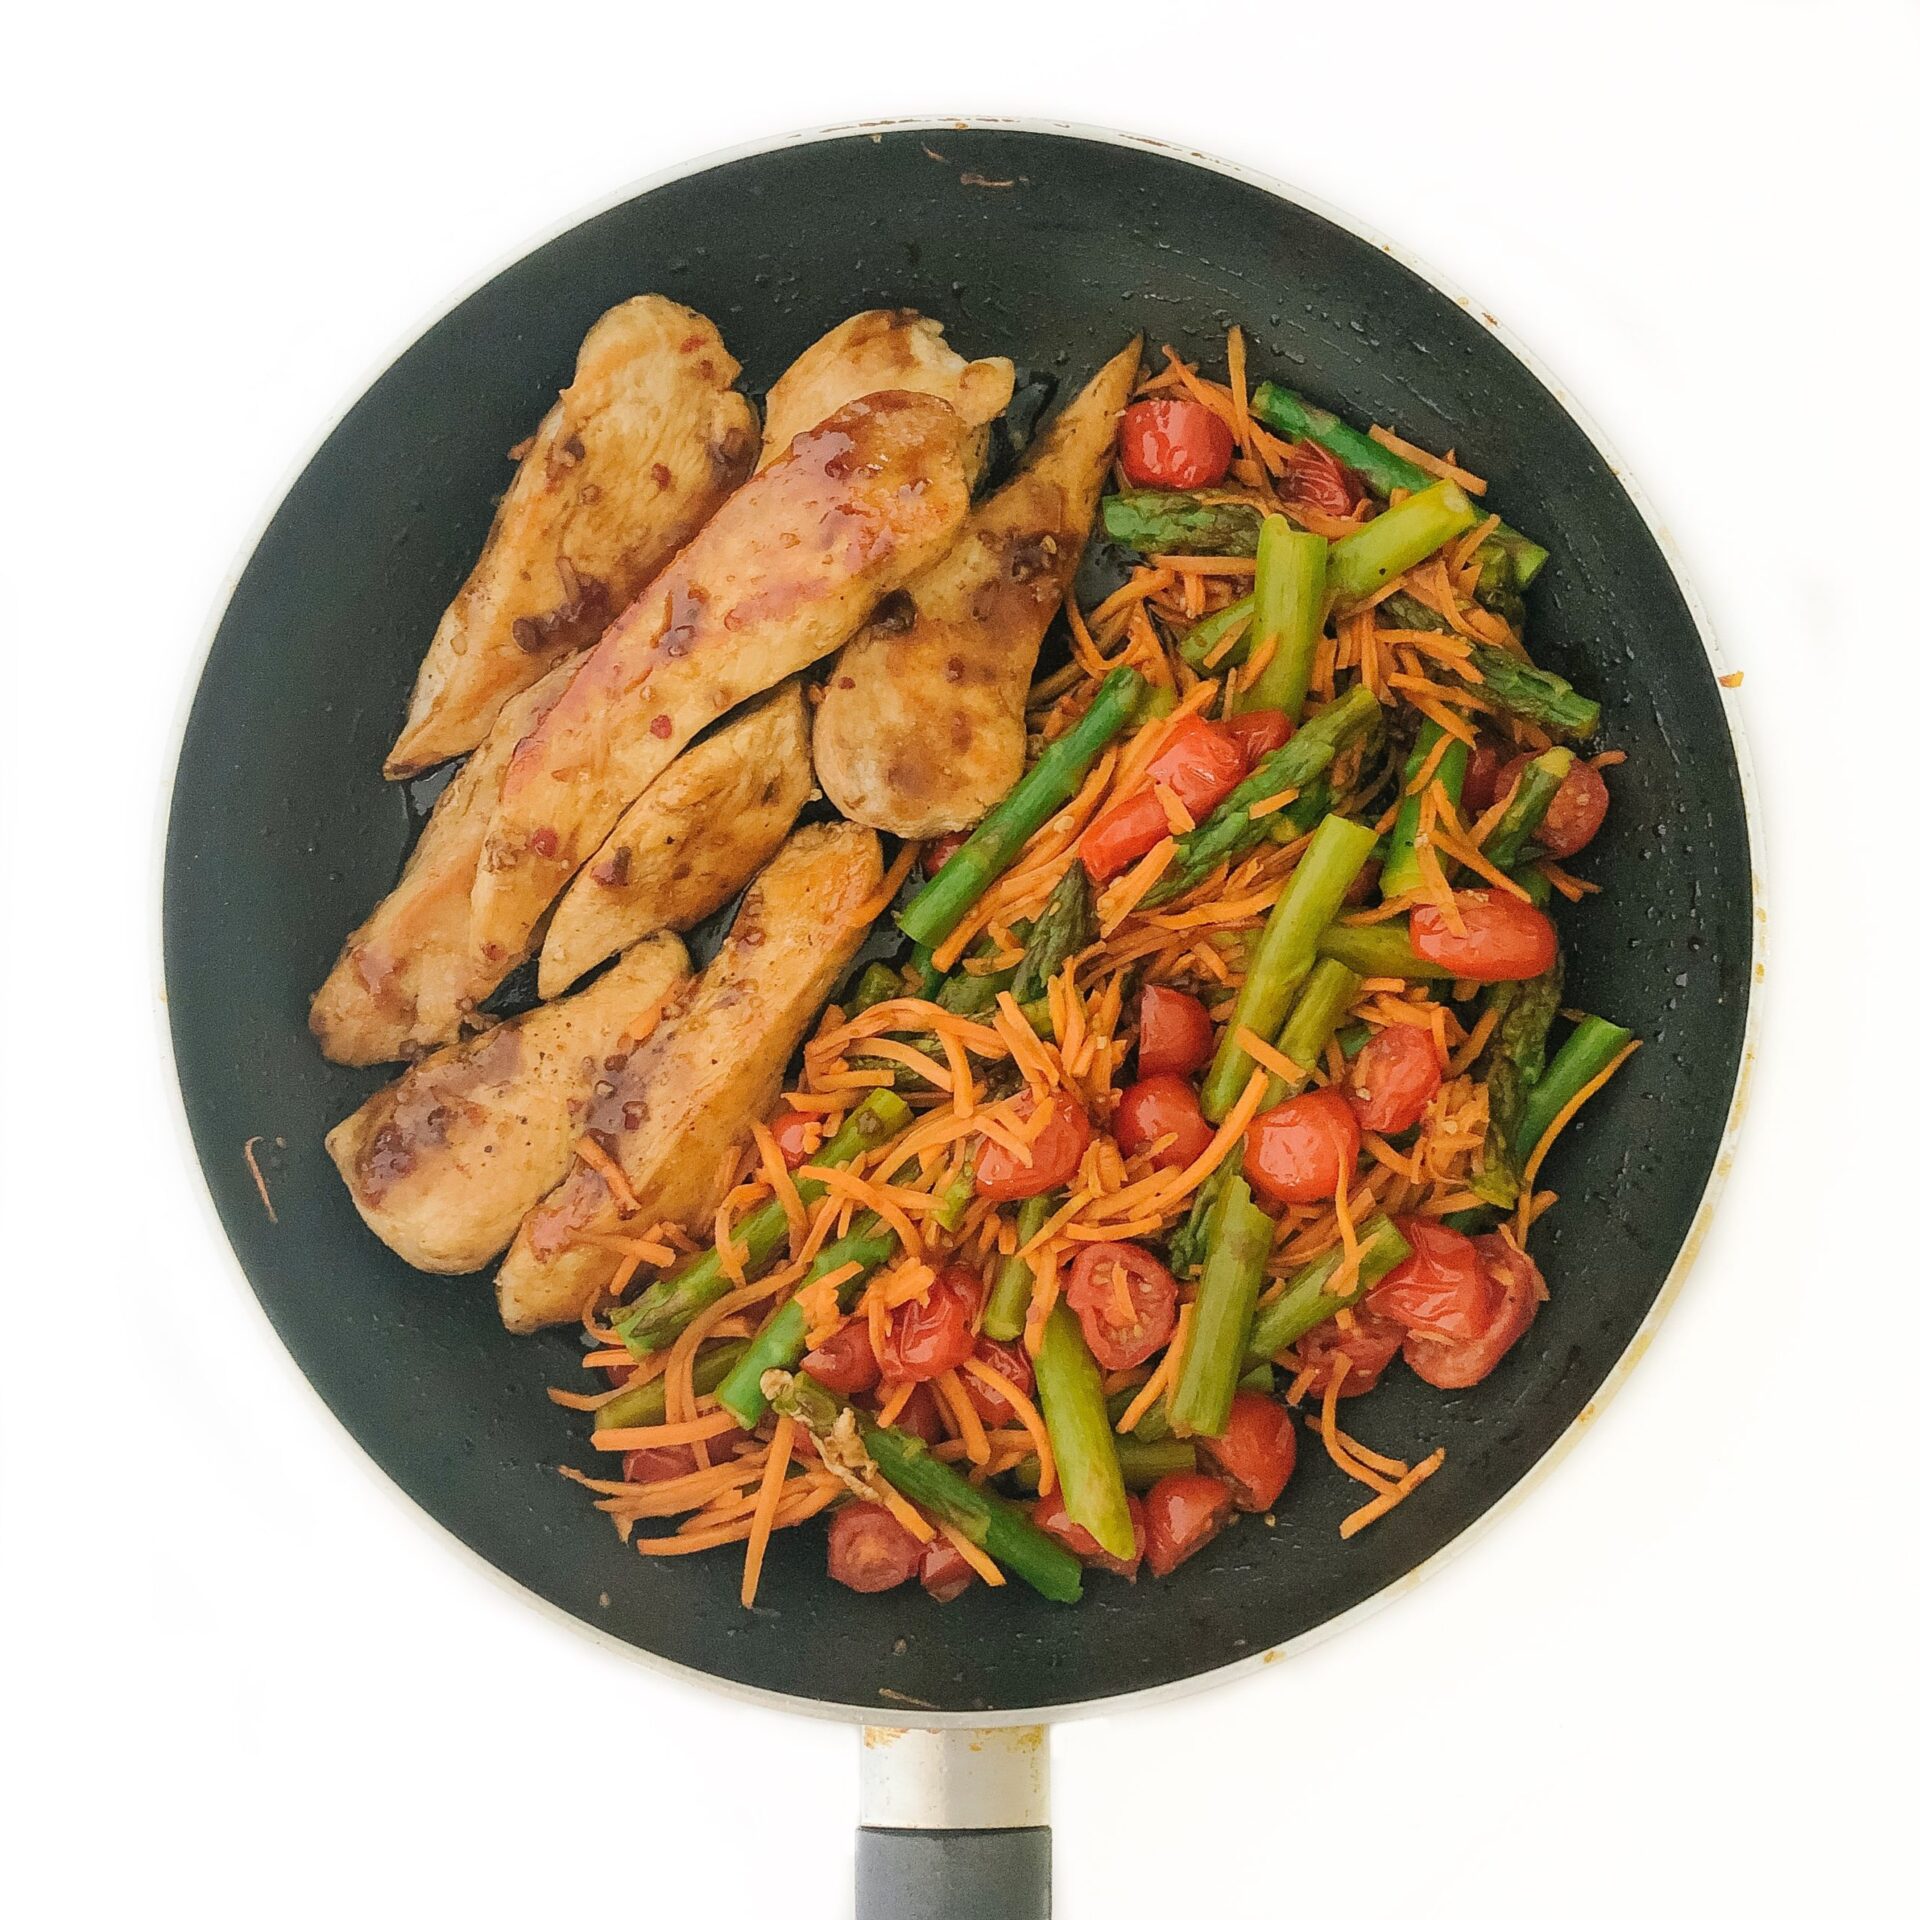 Recipe Review – One Pan Balsamic Chicken and Veggies